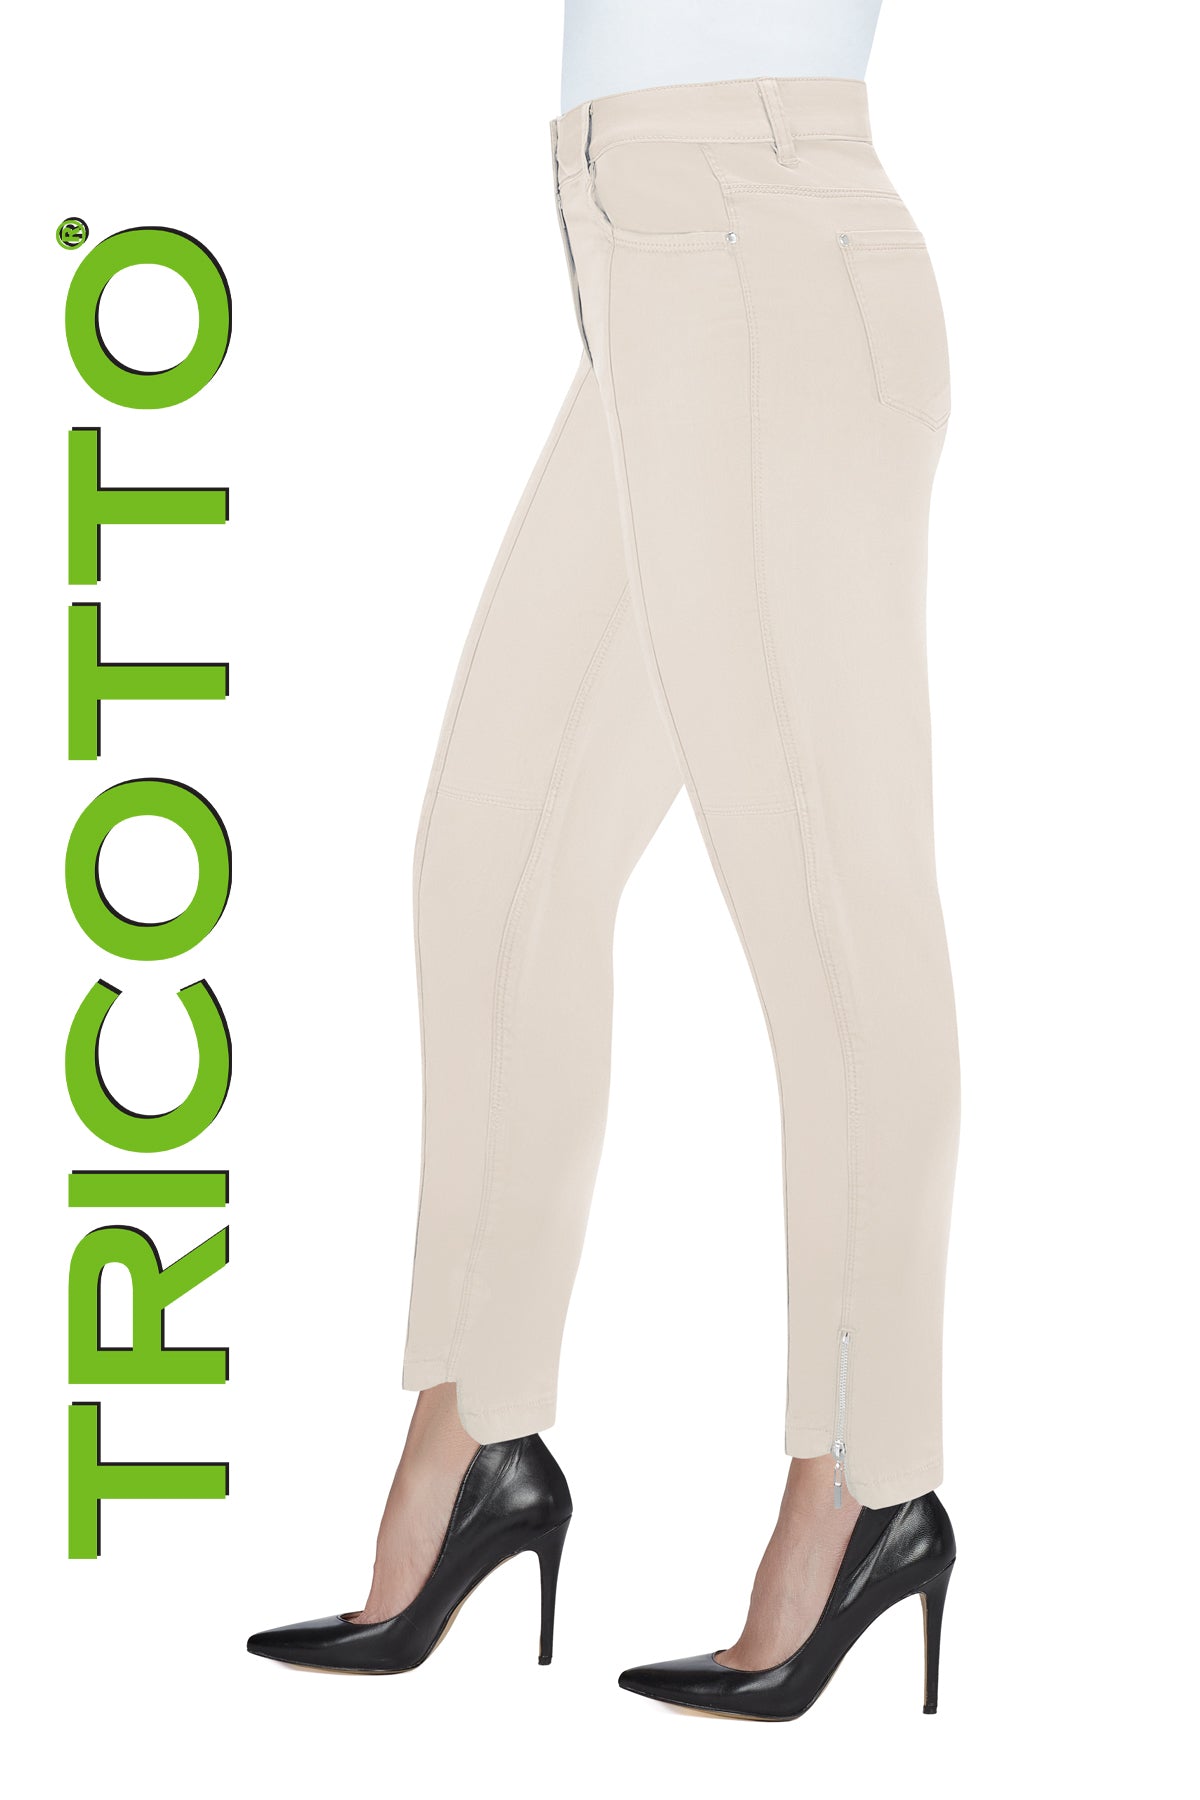 Tricotto Sand 5 Pocket Fly Front Pant With Belt Loops And Belt Loops 